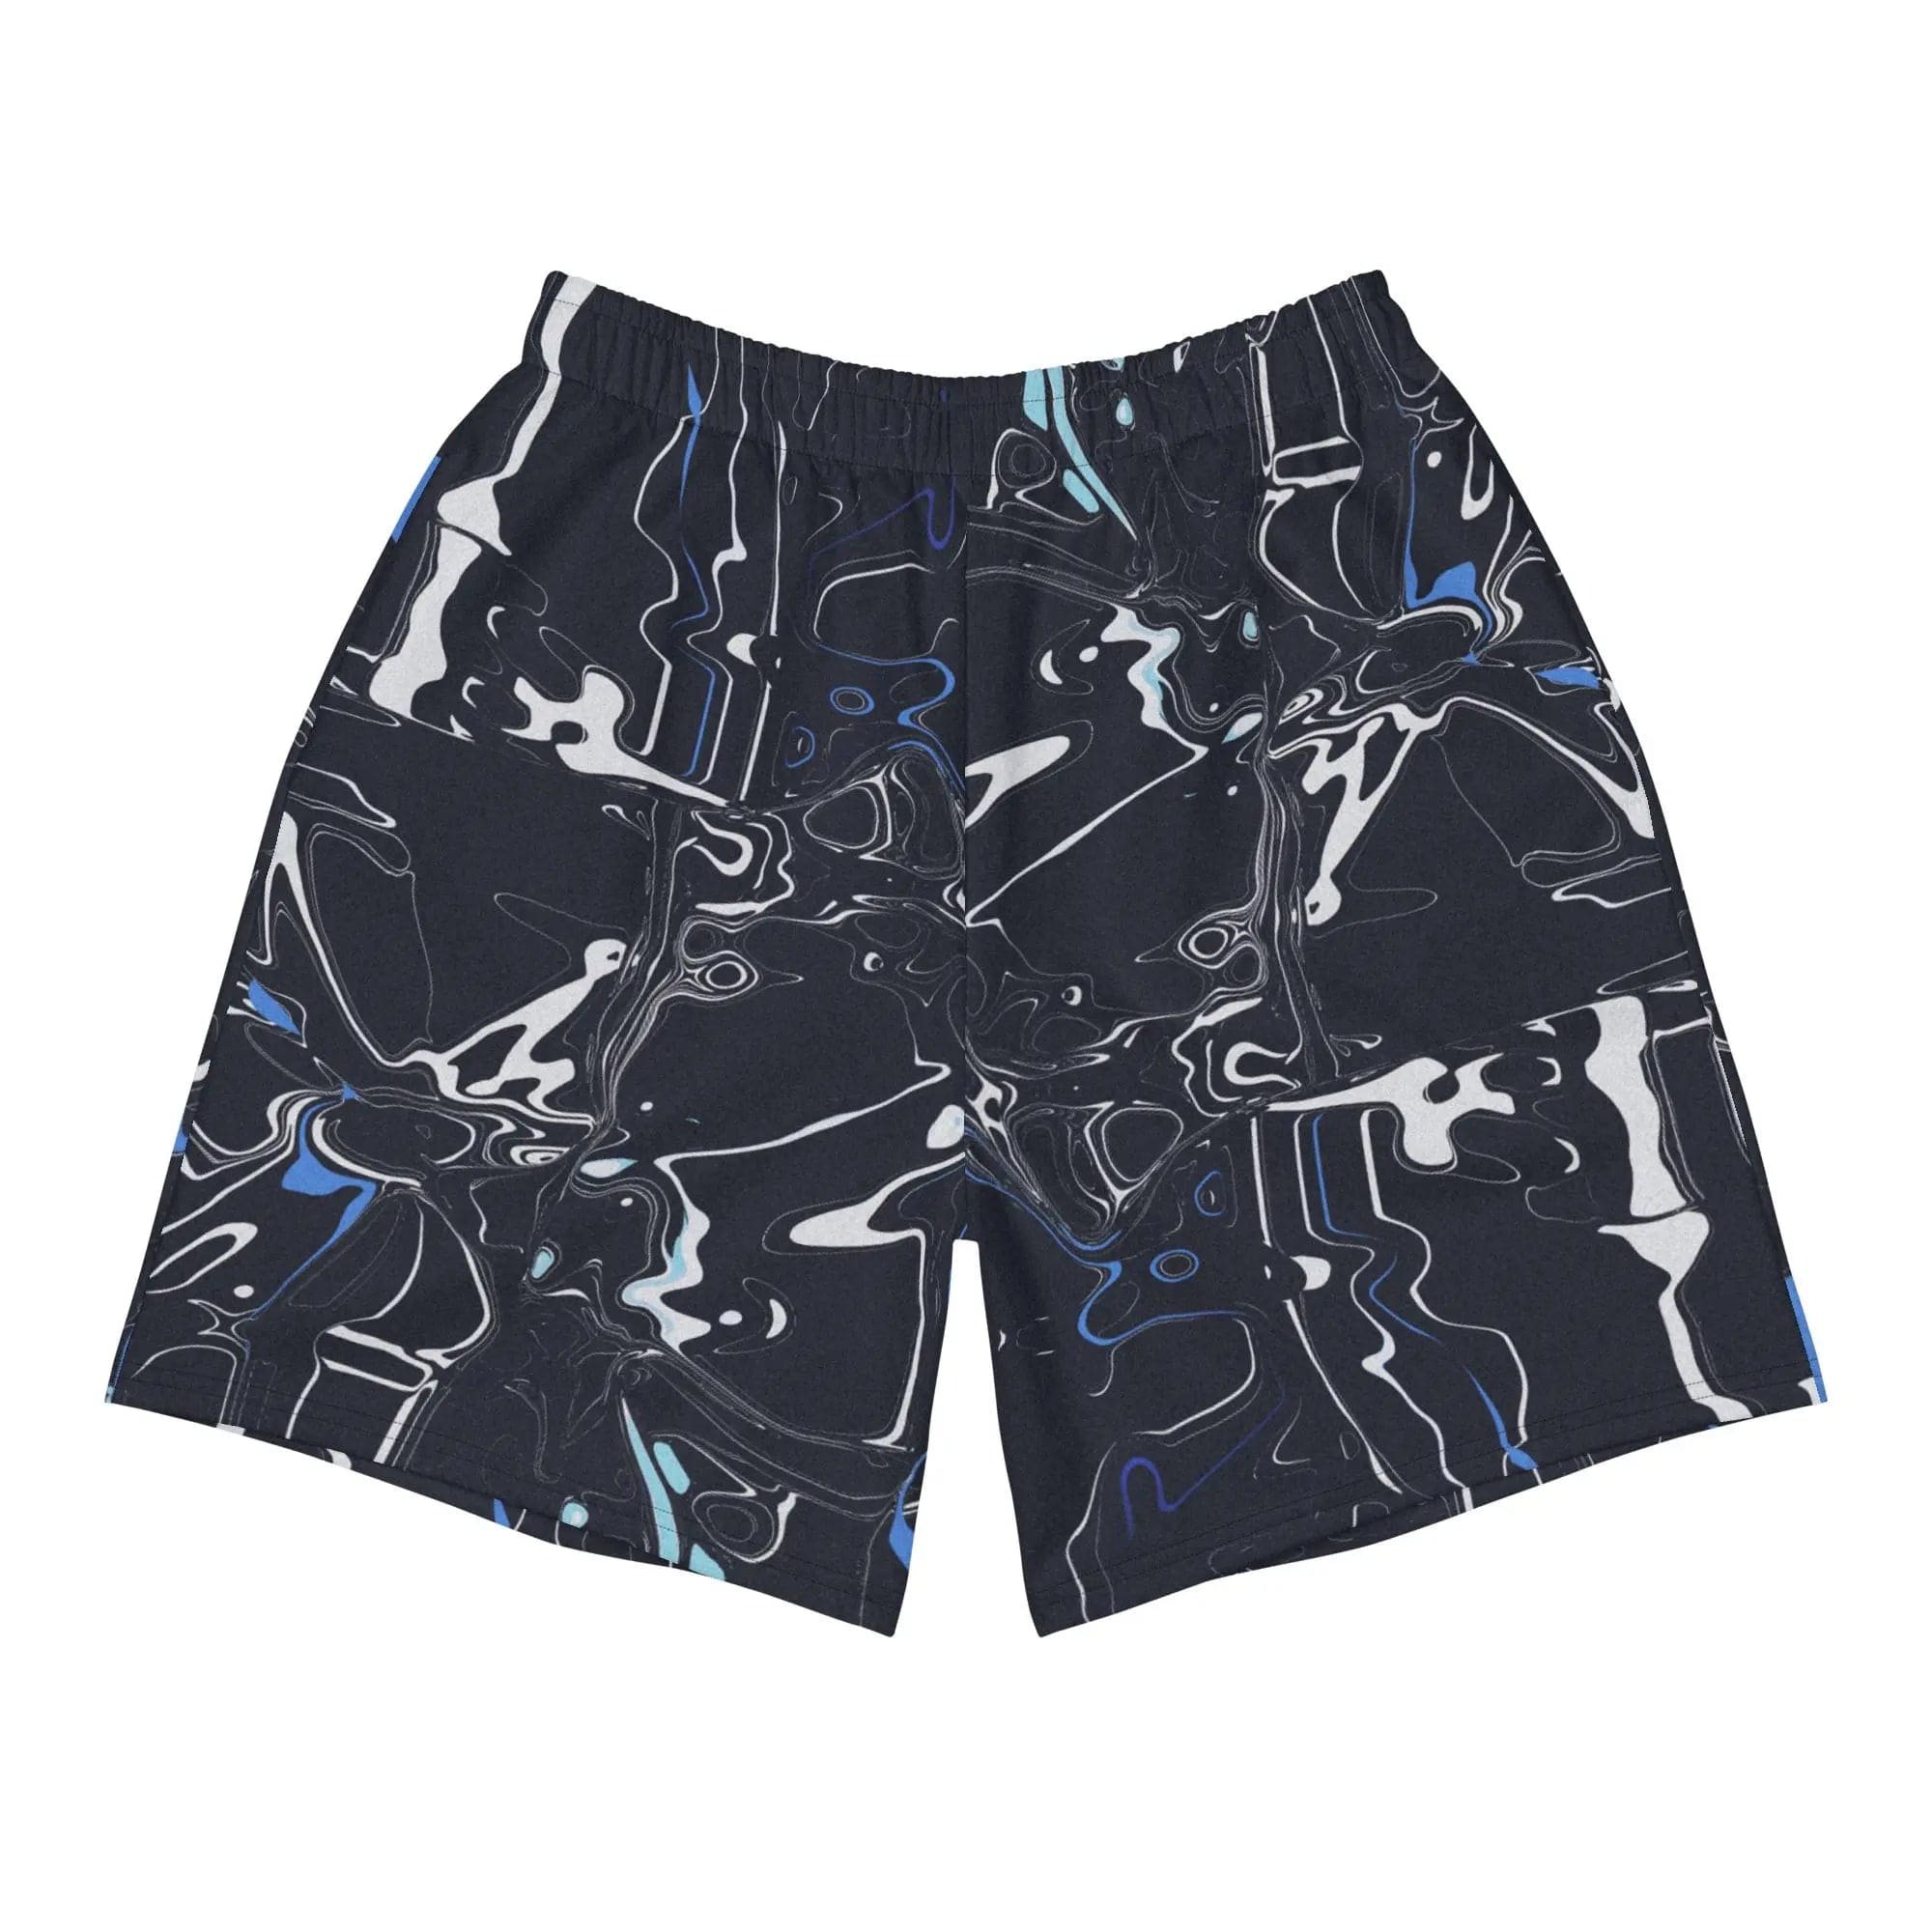 all-over-print-mens-recycled-athletic-shorts-white-front-640c9be151477-10371088.jpg